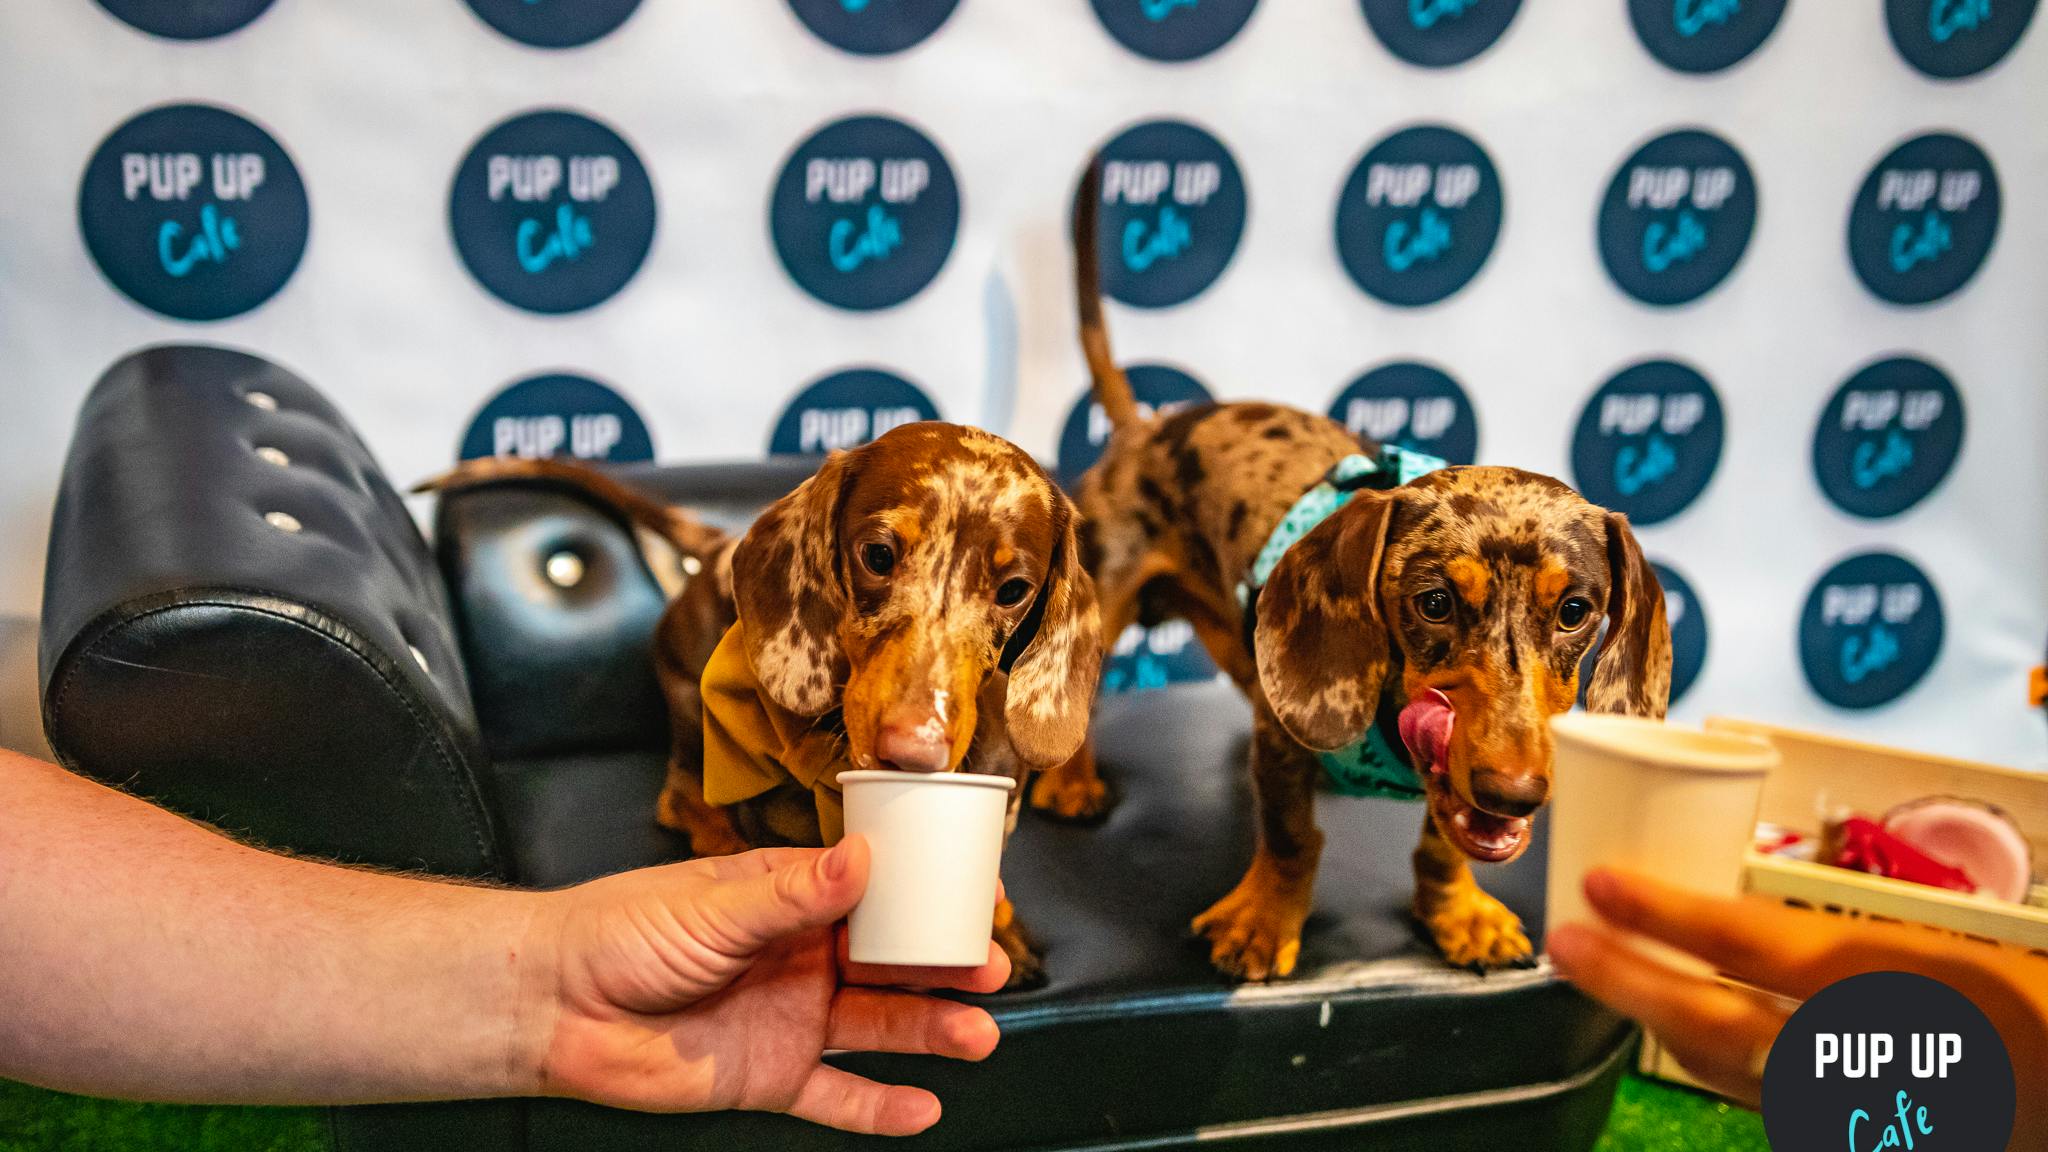 Bristol to host first Pup Up Cafe of 2022!